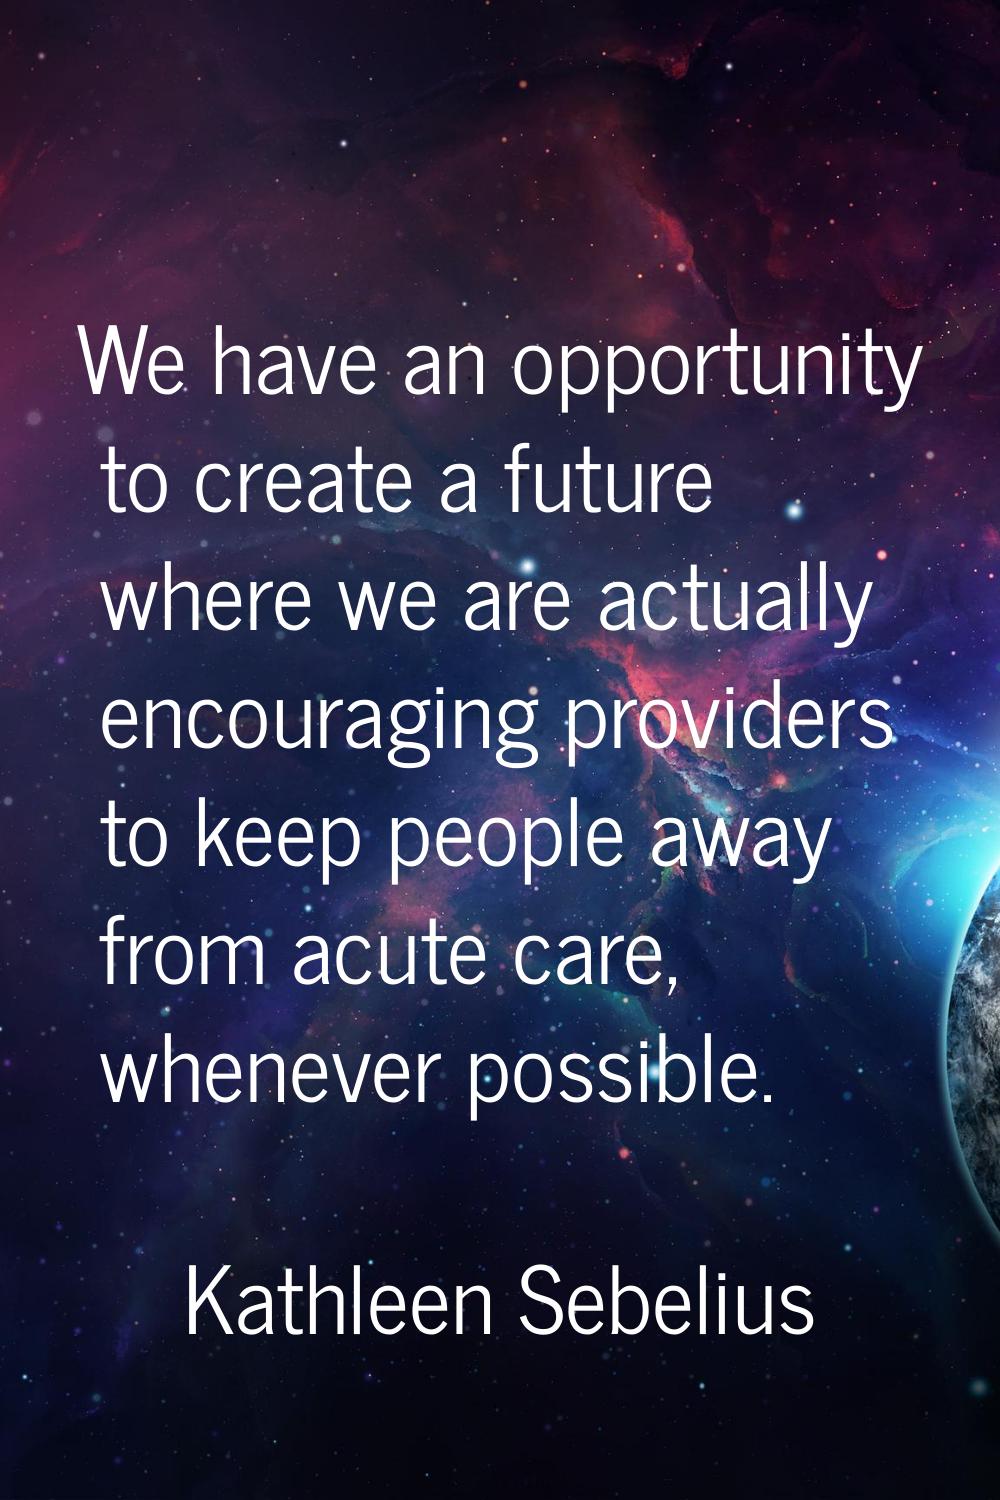 We have an opportunity to create a future where we are actually encouraging providers to keep peopl